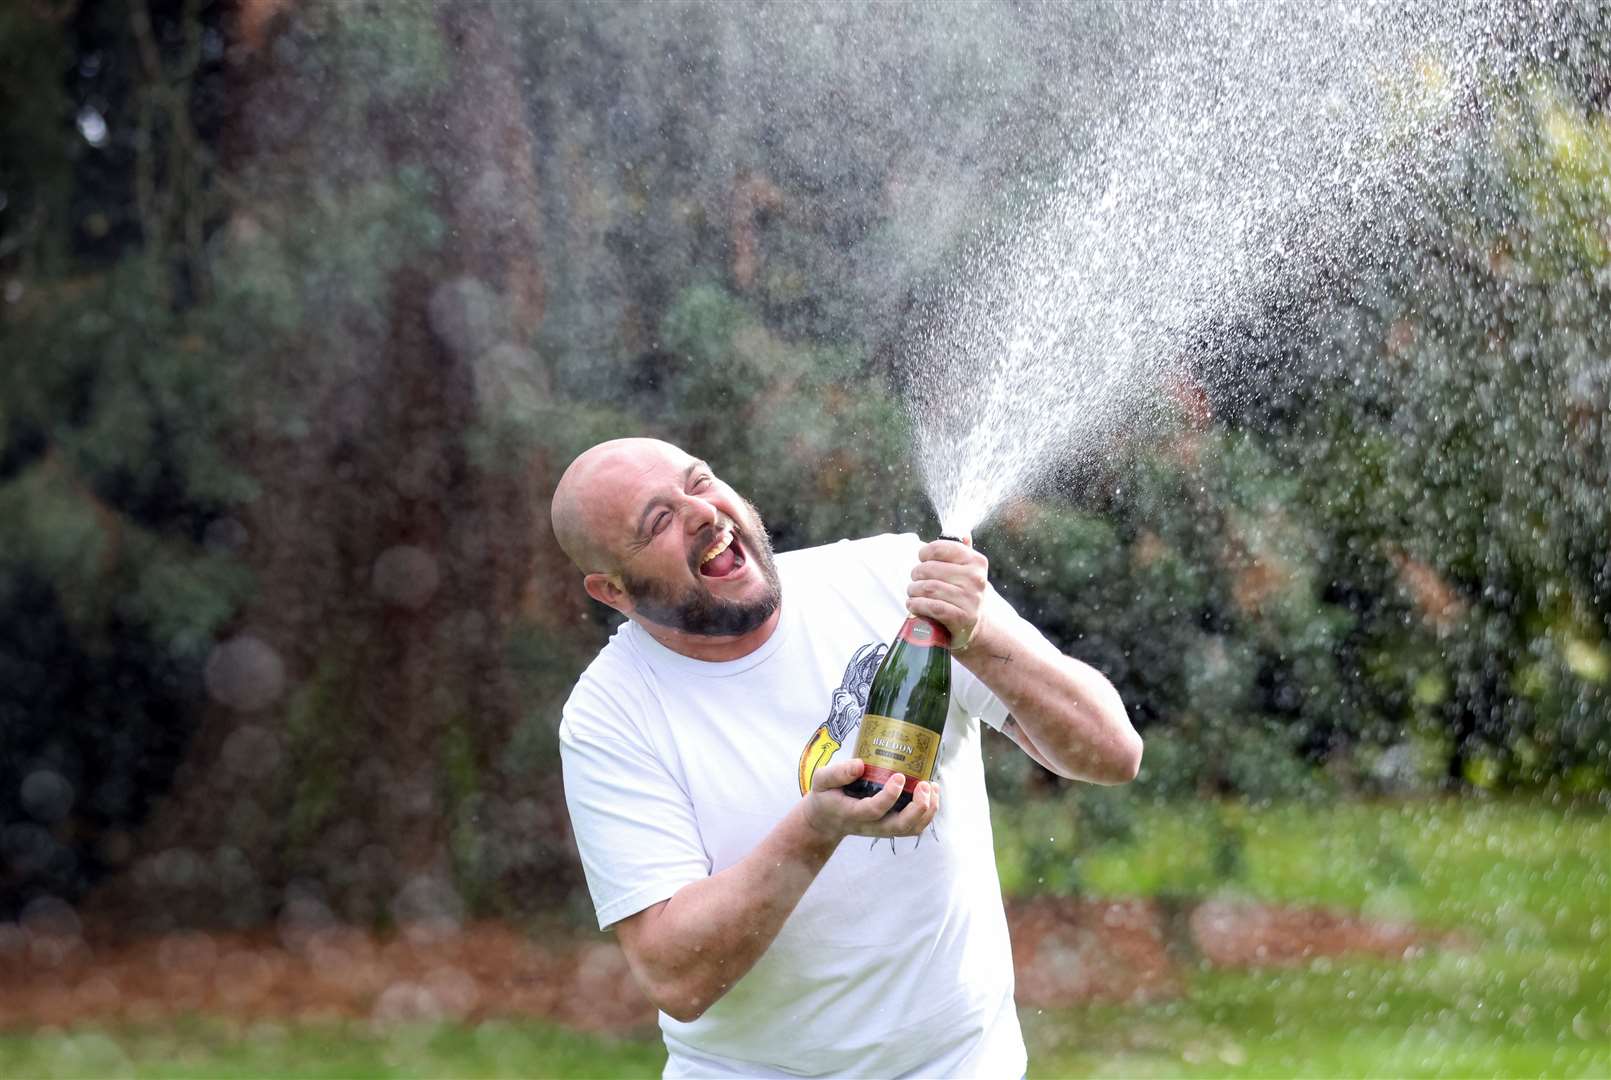 Plumber Sean Irwin bought his winning scratchcard at a newsagents in Brentwood, Essex (National Lottery/PA)